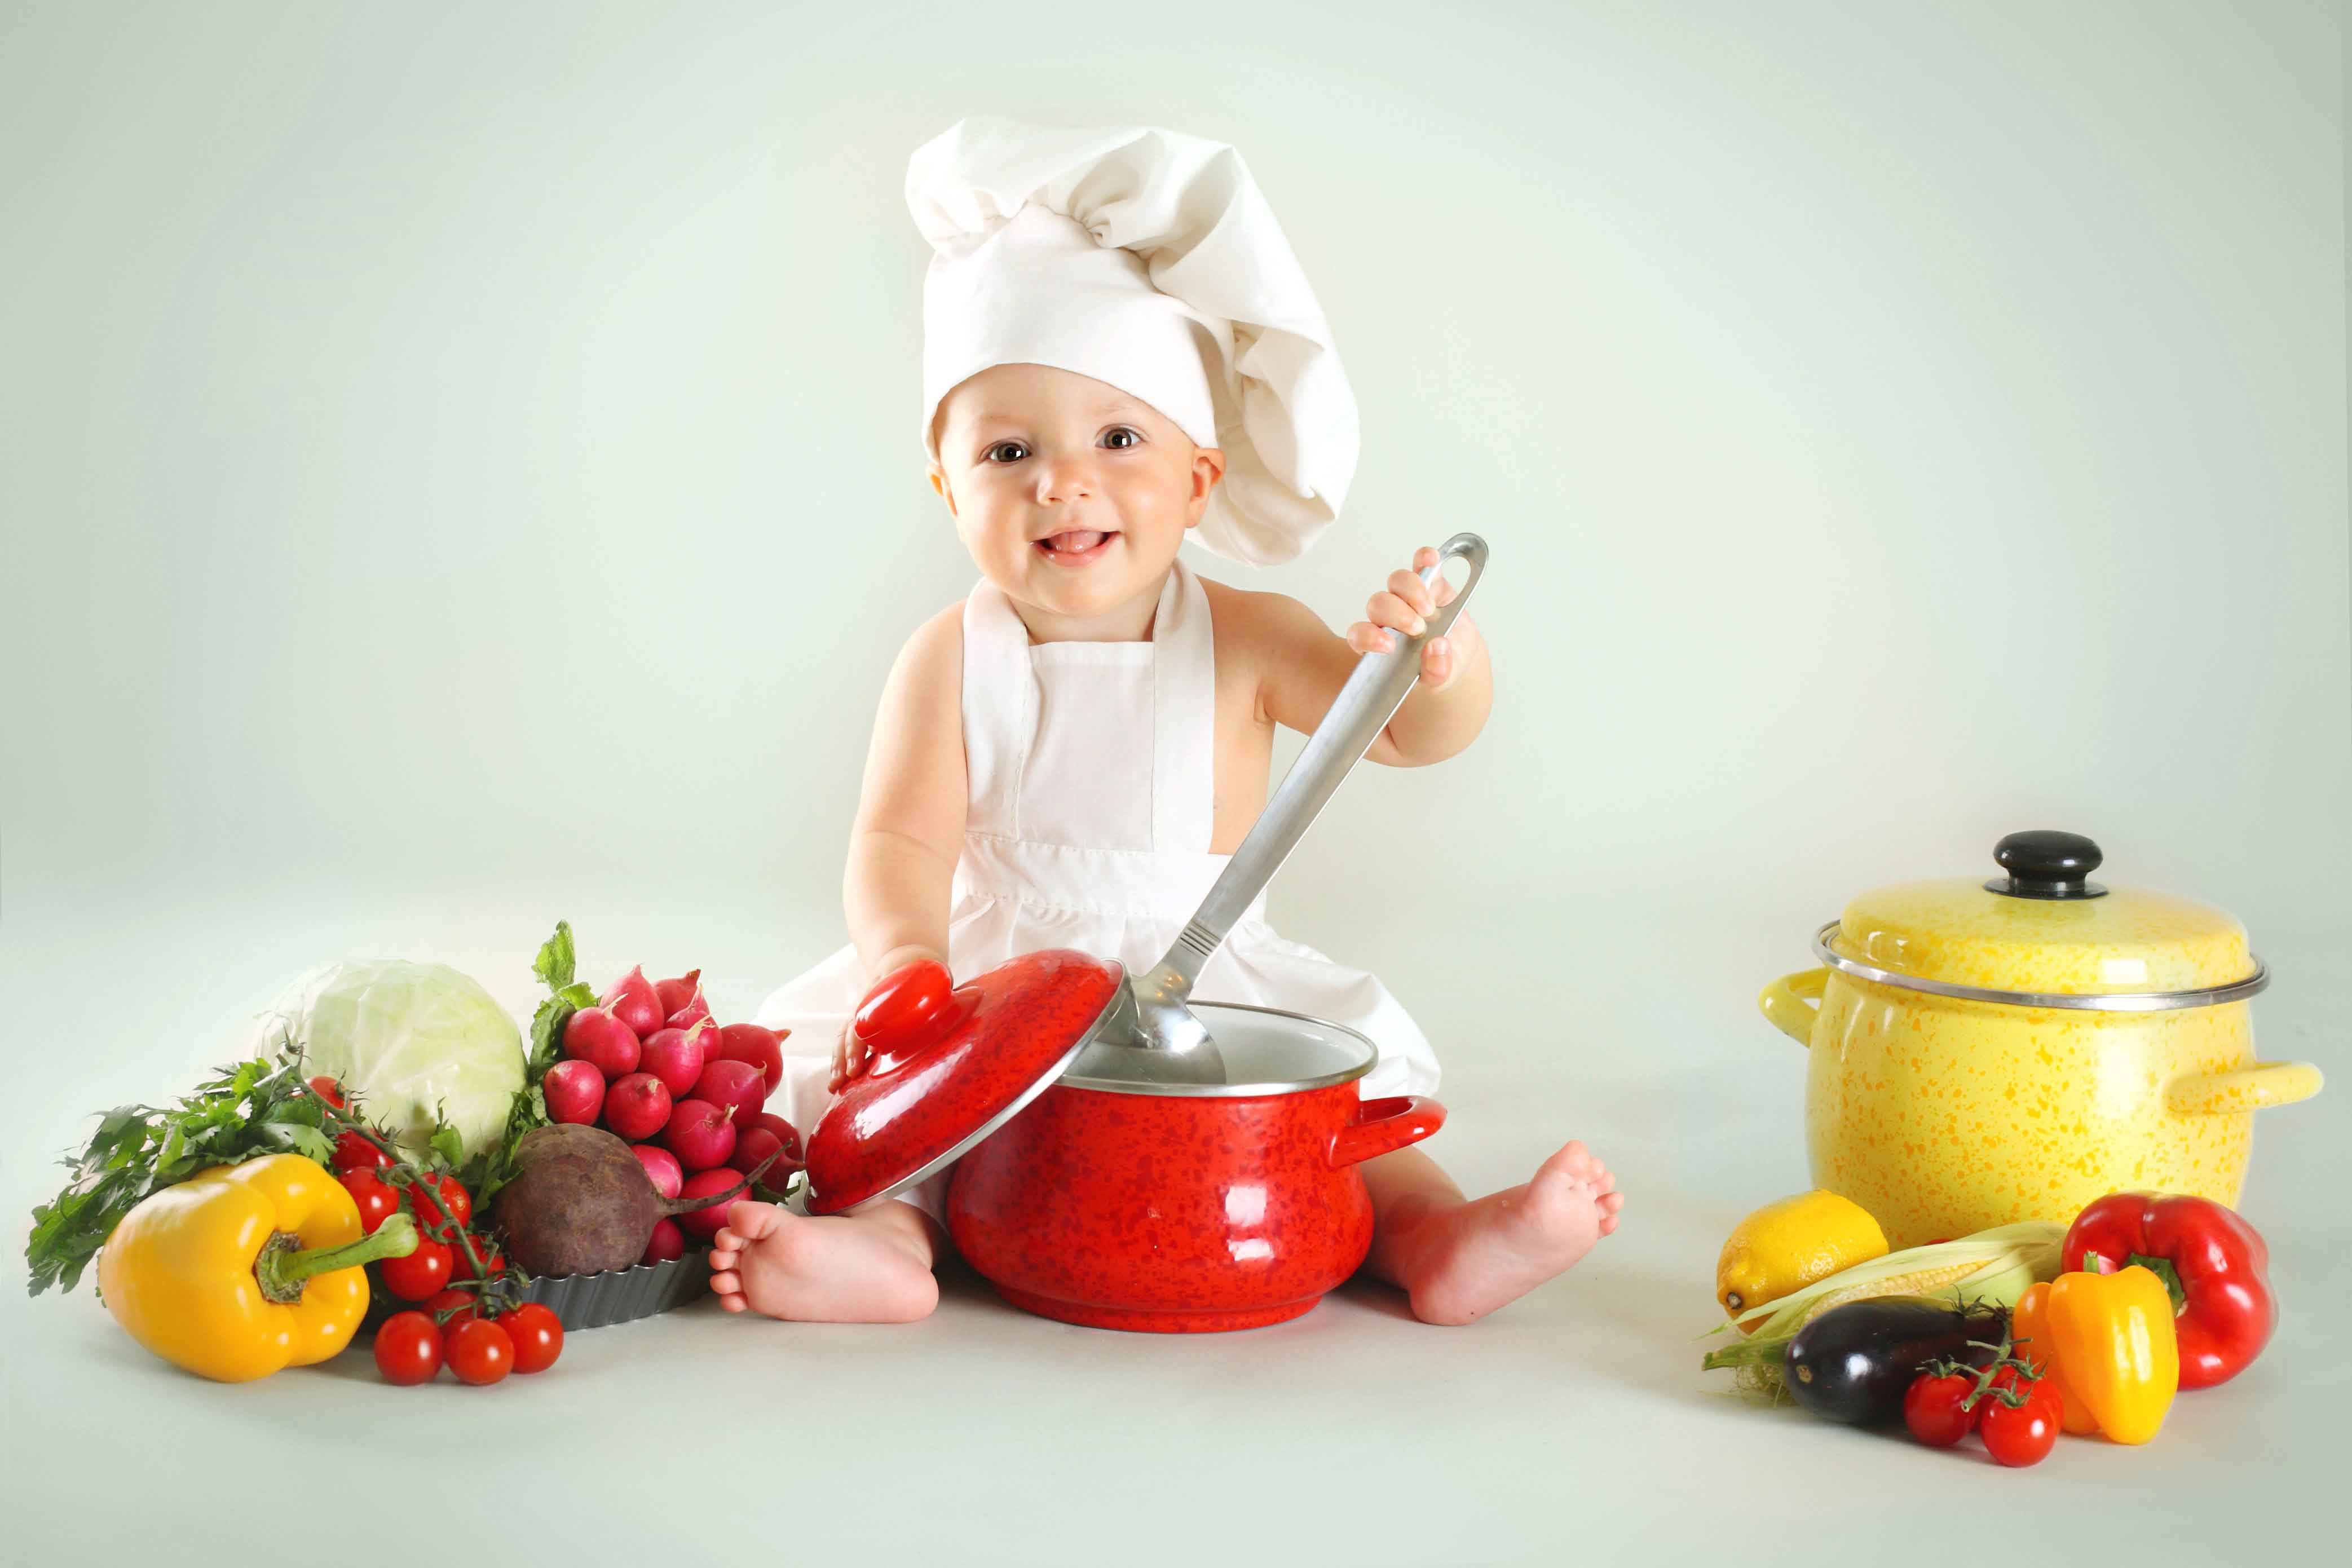 Baby wearing a chef hat with vegetables and pan